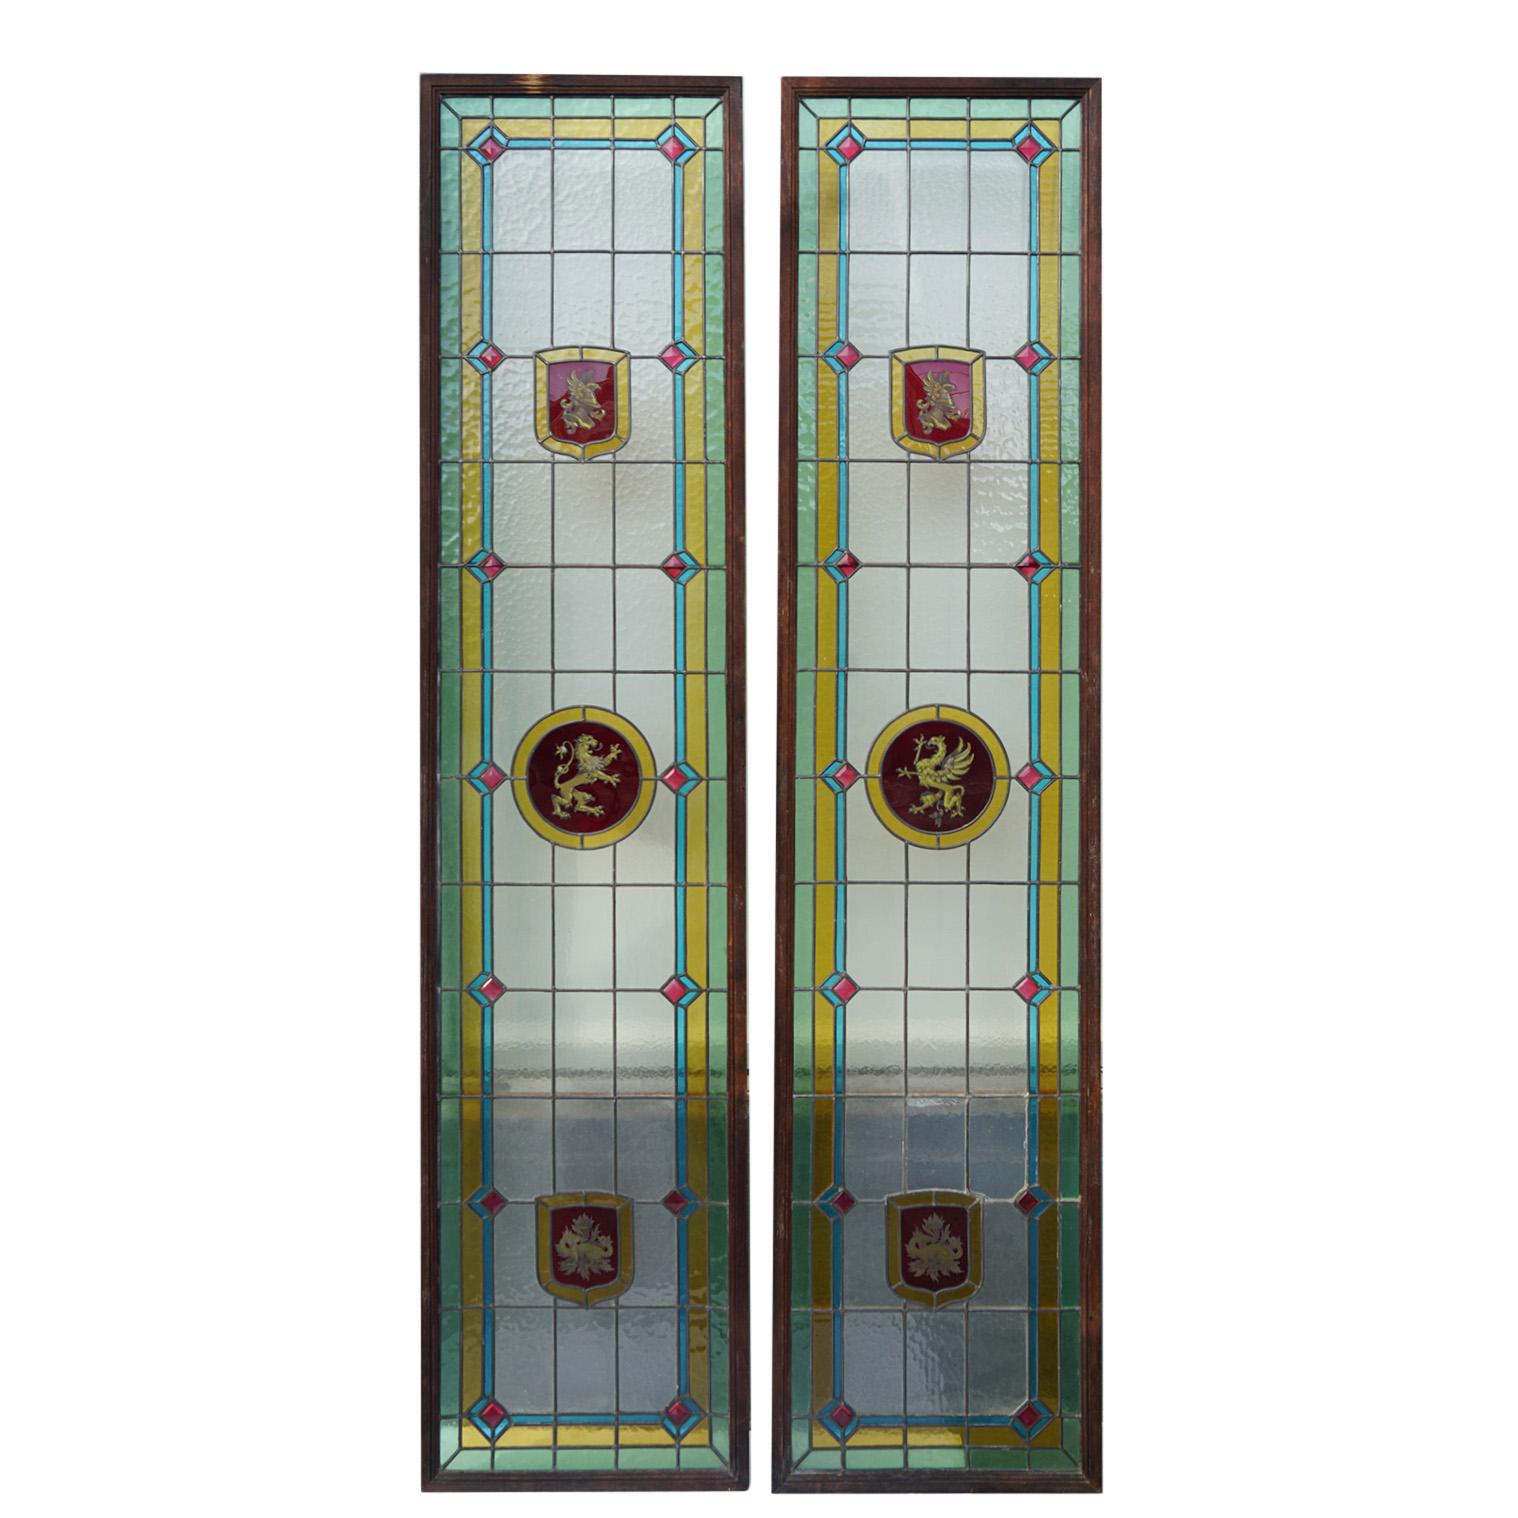 A pair of antique stained glass panels. Note the wear and tear.